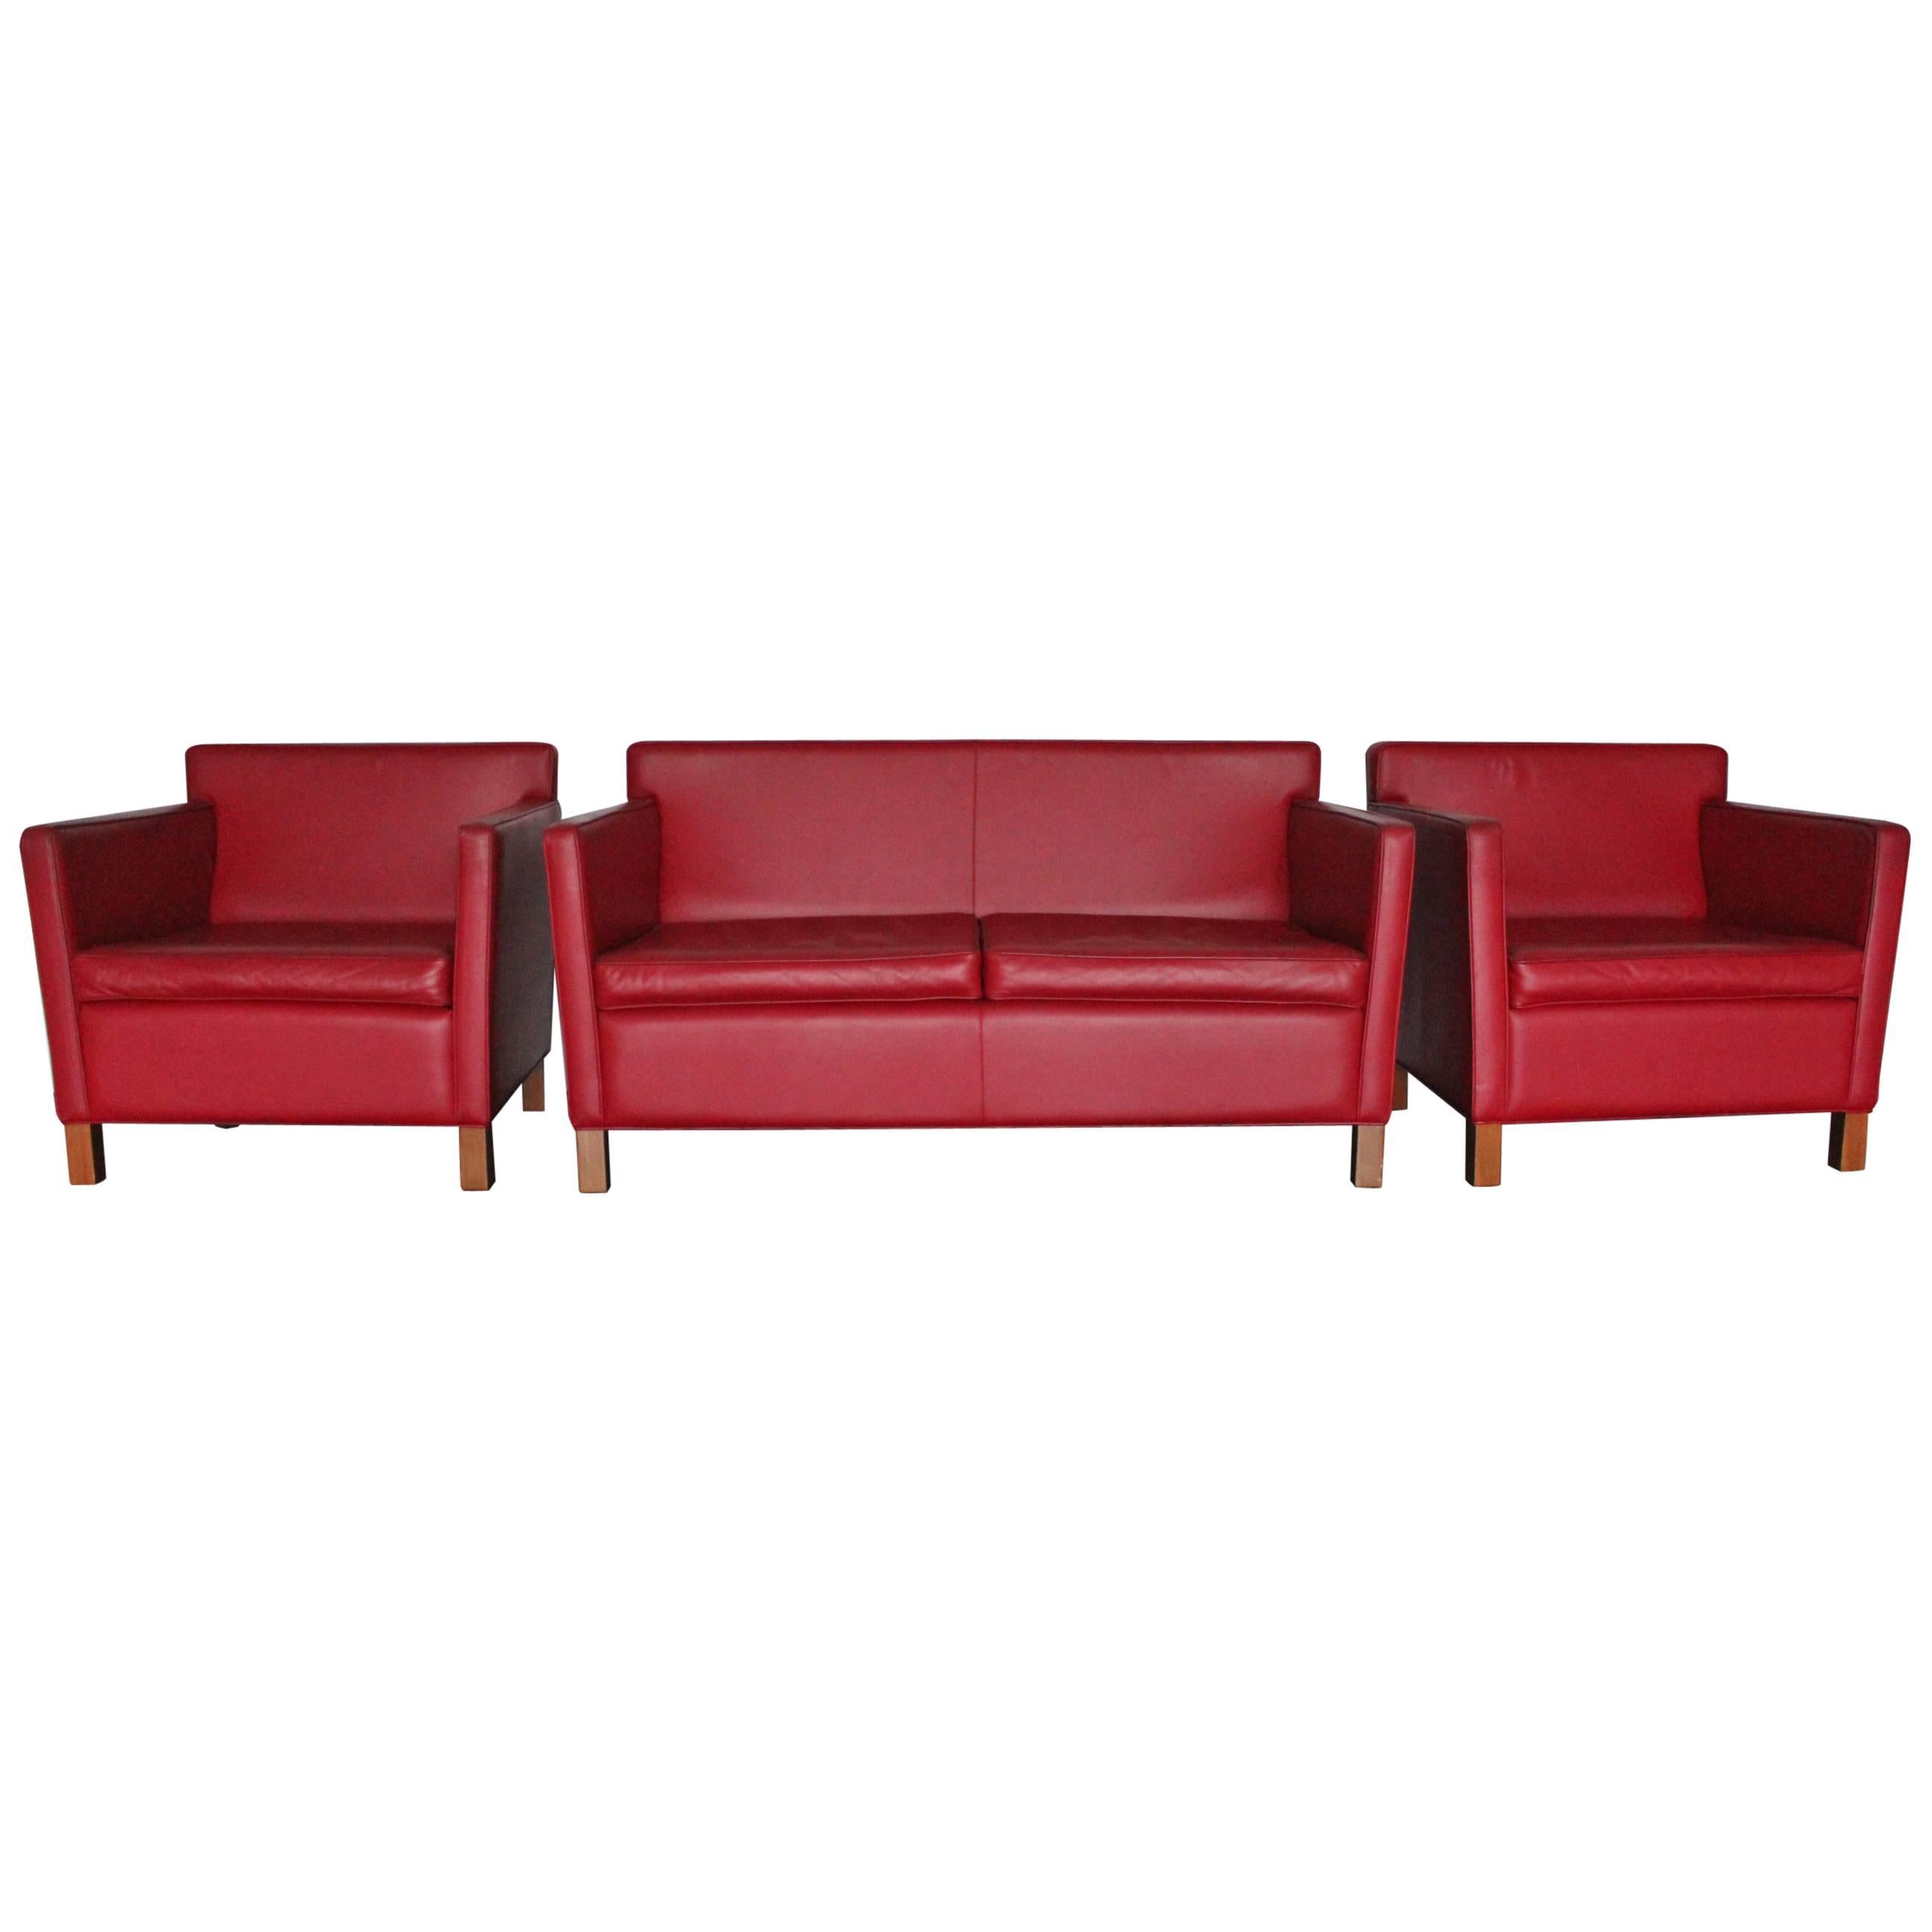 Knoll Studio "Krefeld" Sofa and Armchairs in Red Leather by Mies Van Der Rohe